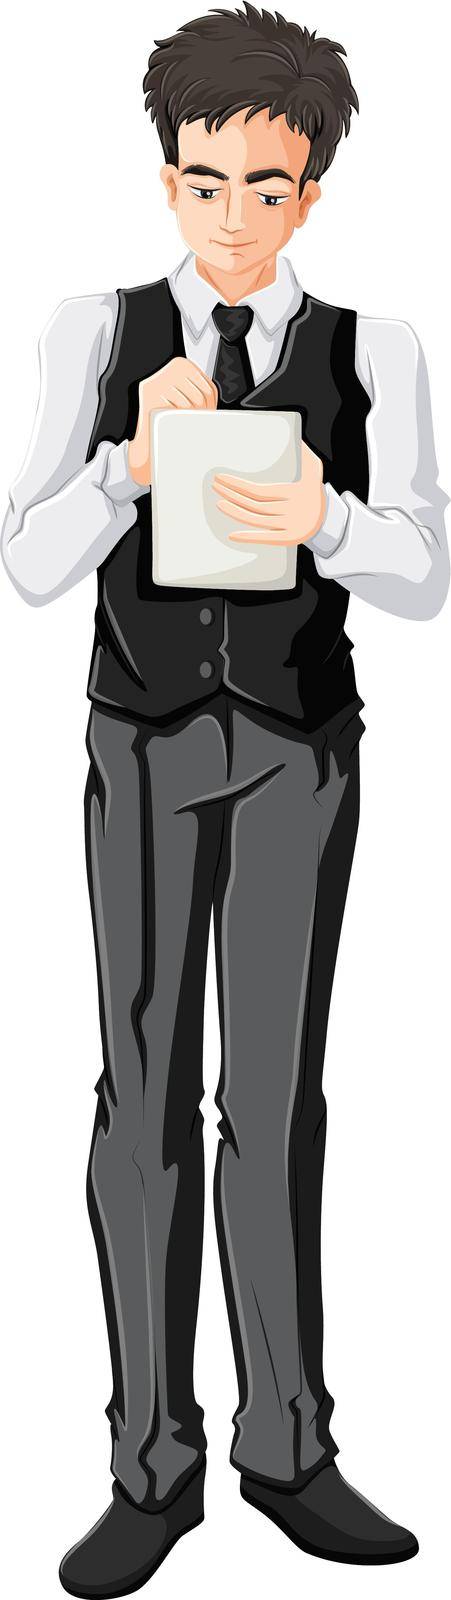 Illustration of a waitstaff on a white background